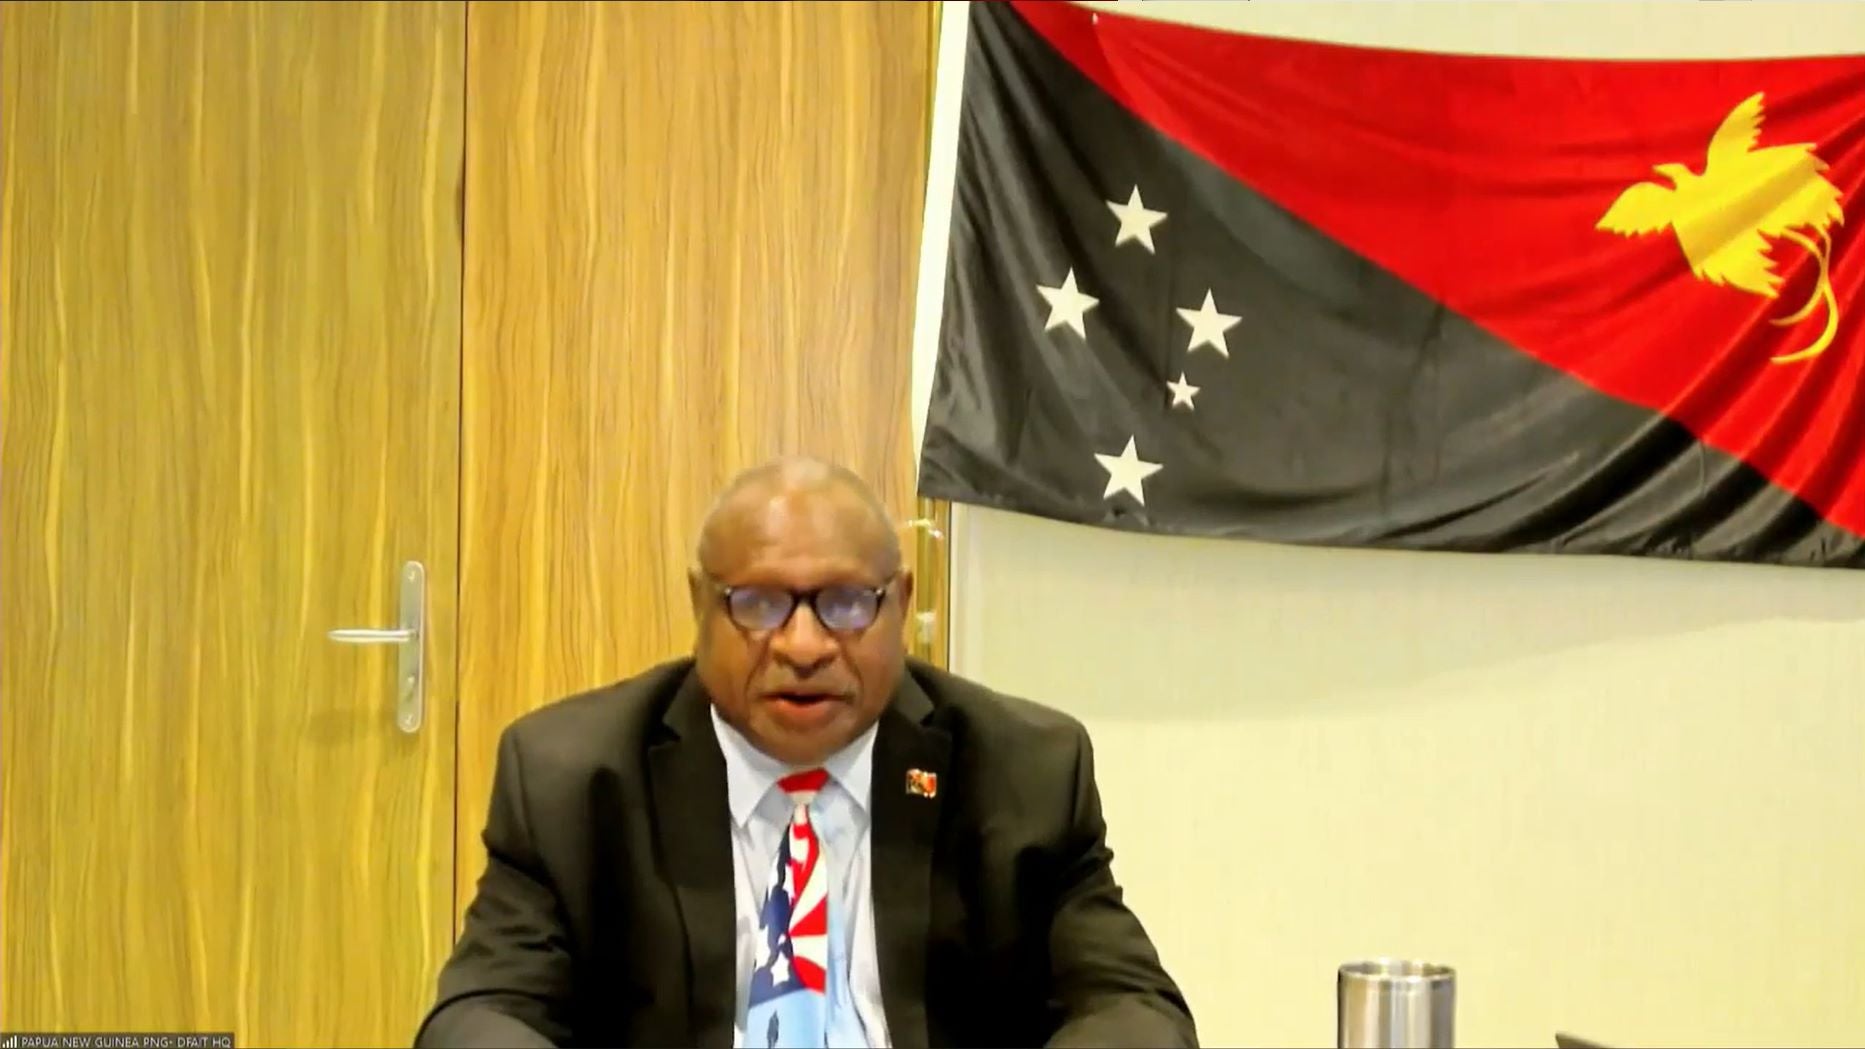 Papua New Guinea: Address Abuses Raised at UN Review